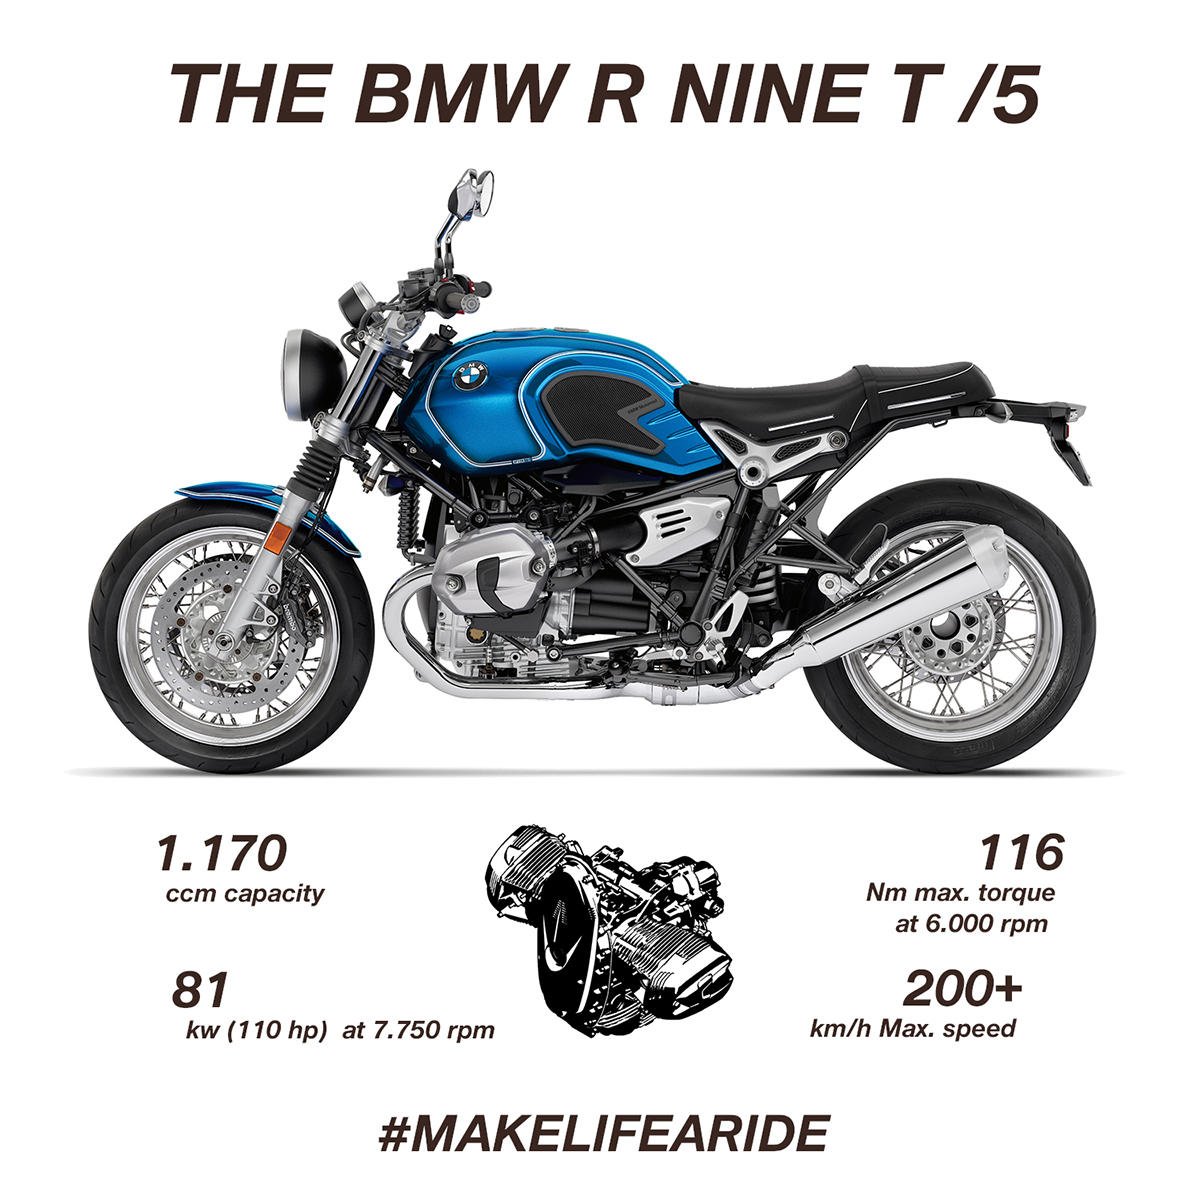 Bmwmotorrad Retro Design Doesn T Mean Less Power On The Contrary Our Wunderbike Guarantees Even More Fun Than Ever Before Makelifearide Soulfuel Bmwmotorrad T Co R8ivijslk7